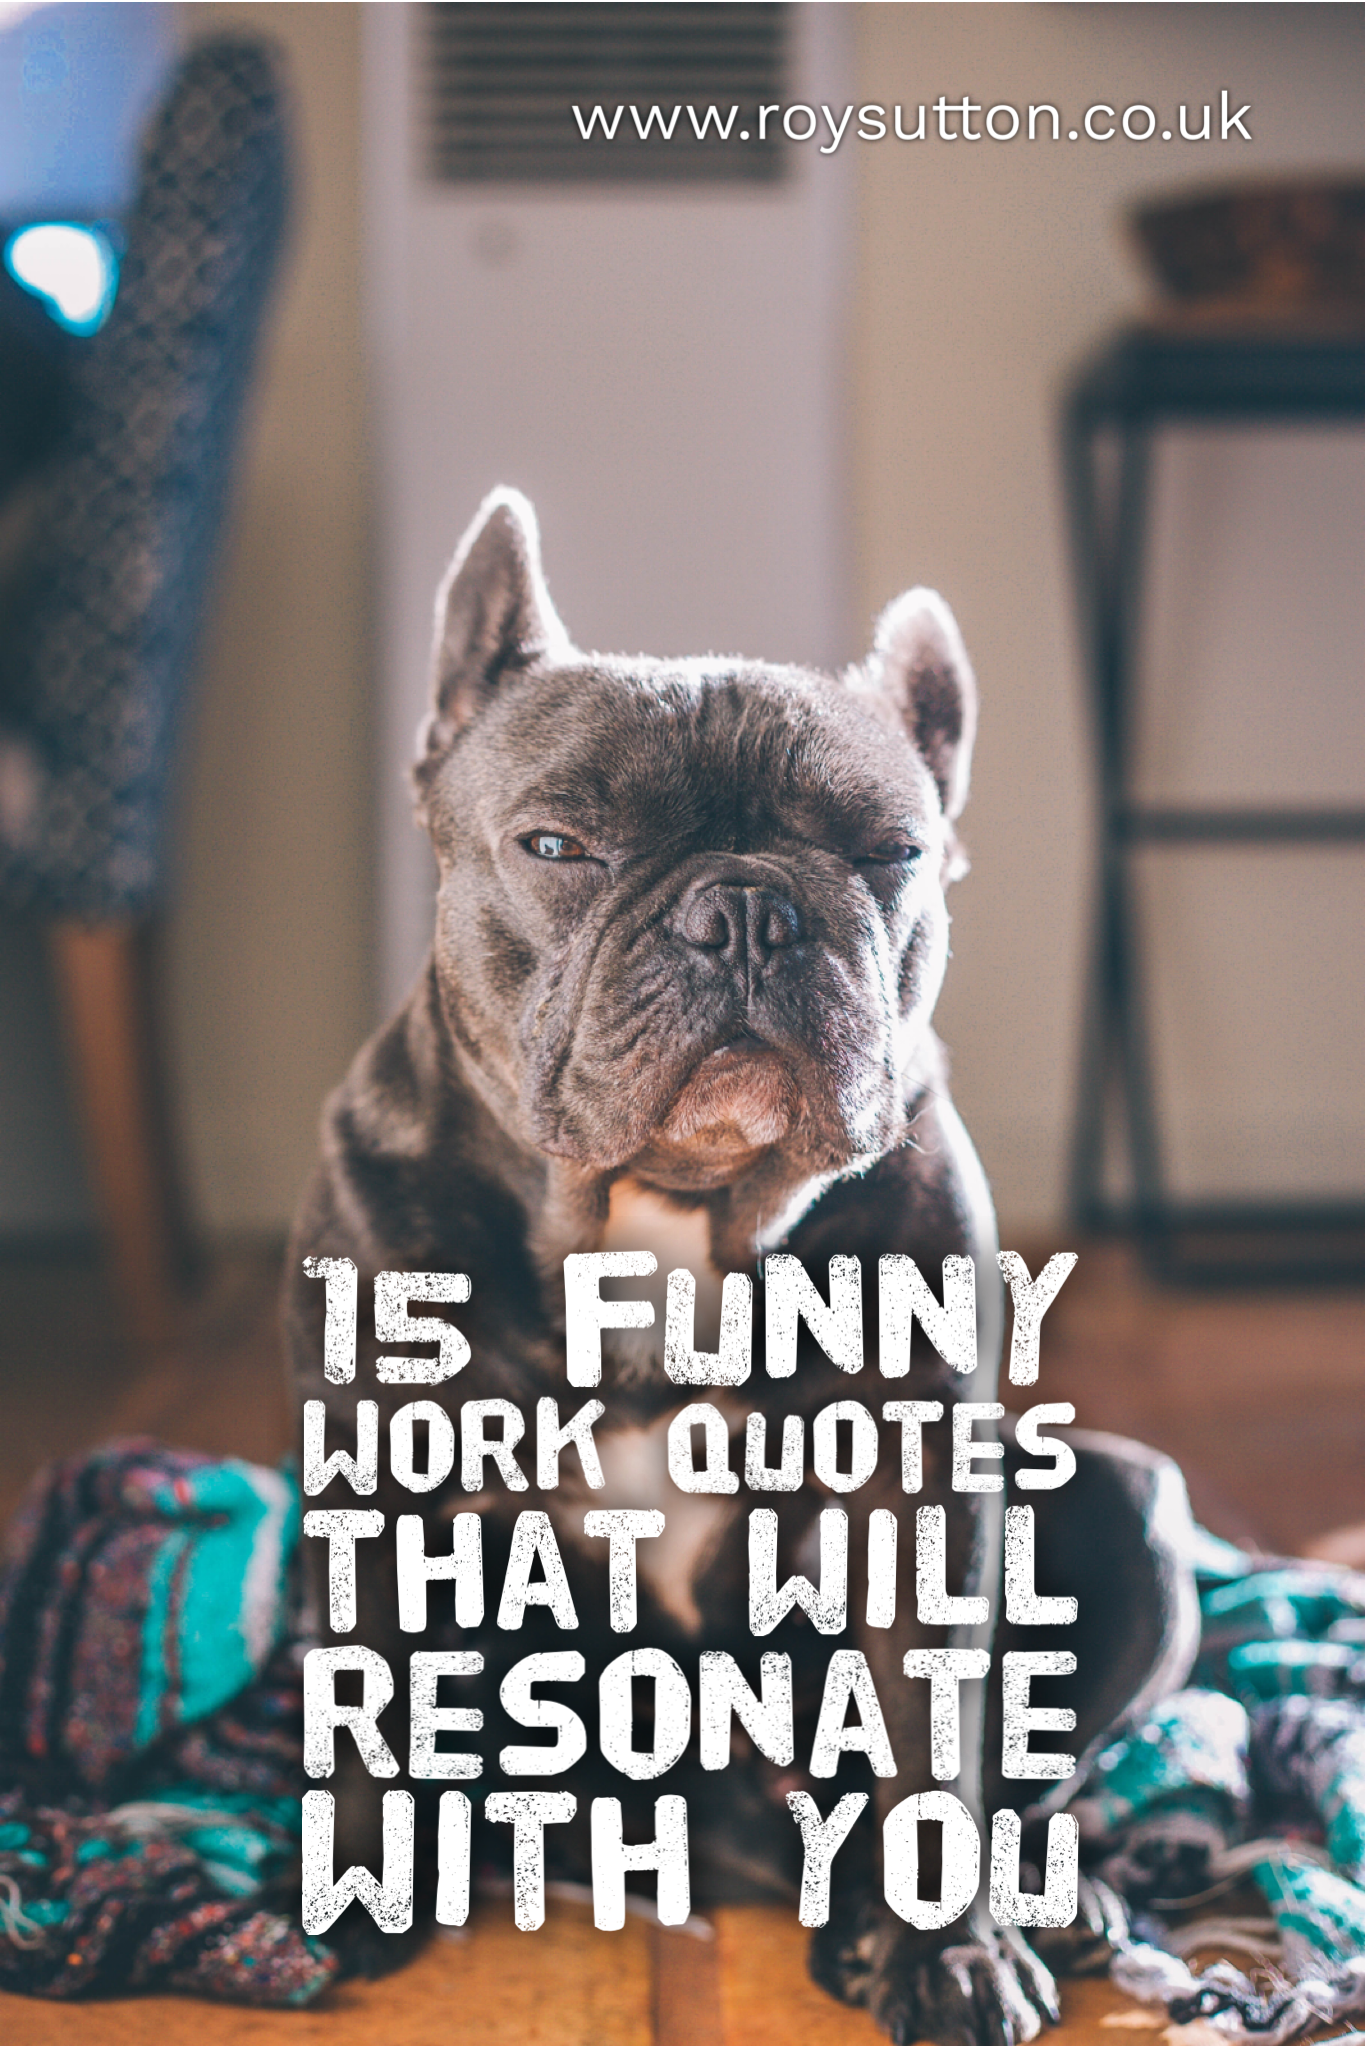 15-funny-work-quotes-that-will-certainly-resonate-with-you-roy-sutton